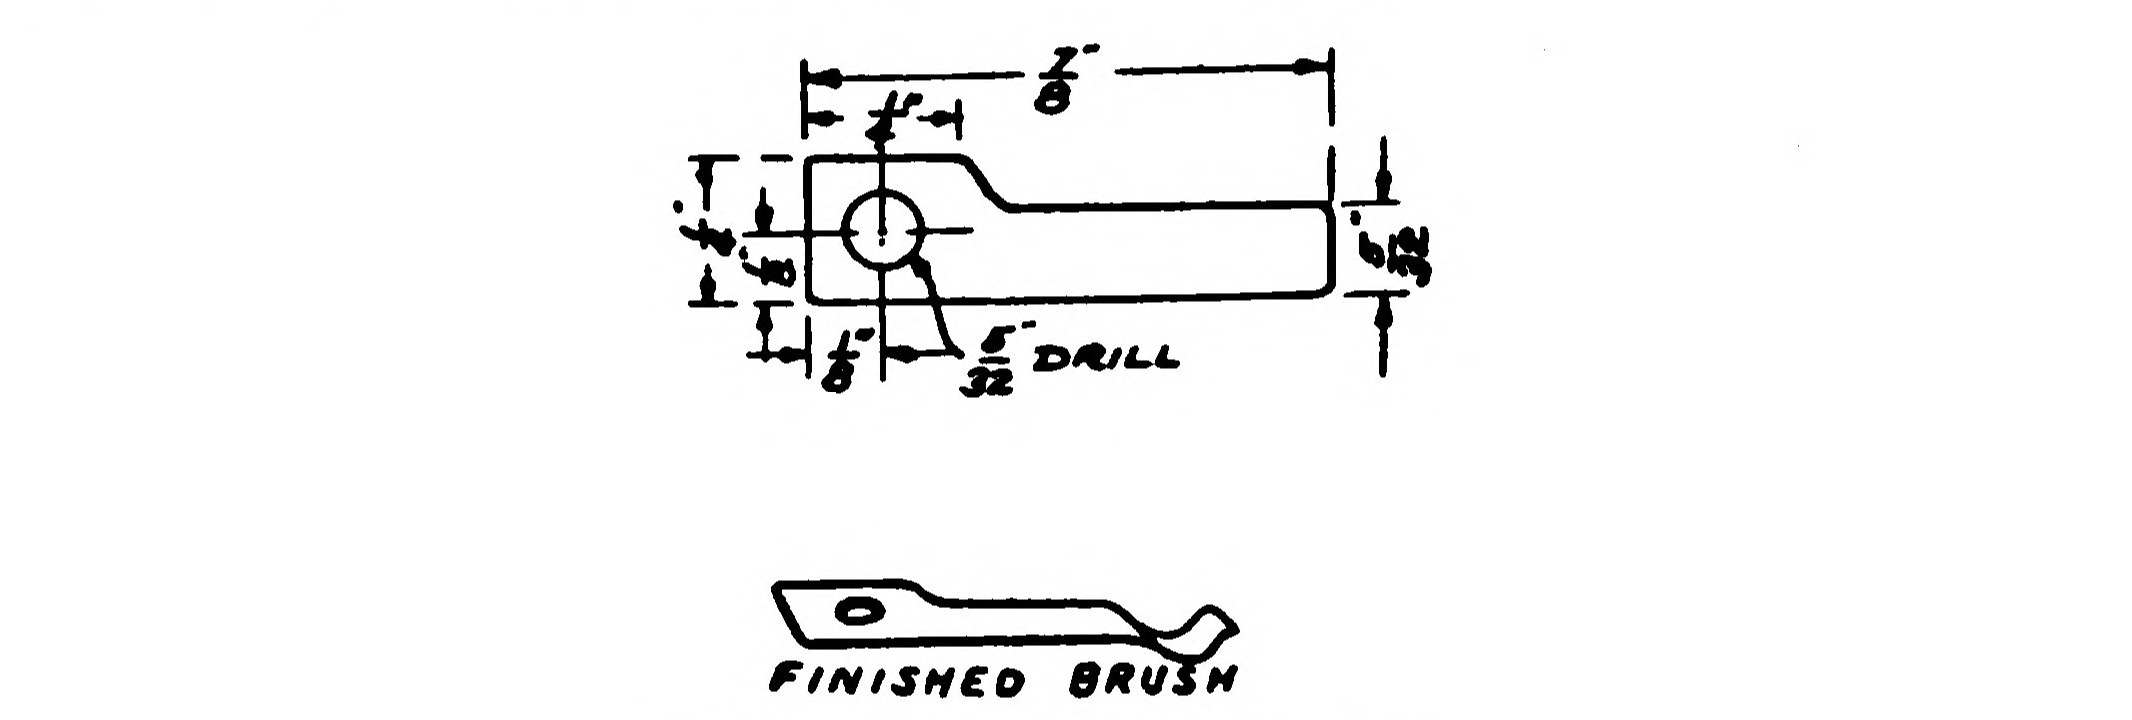 FIG. 141.—The Brushes.